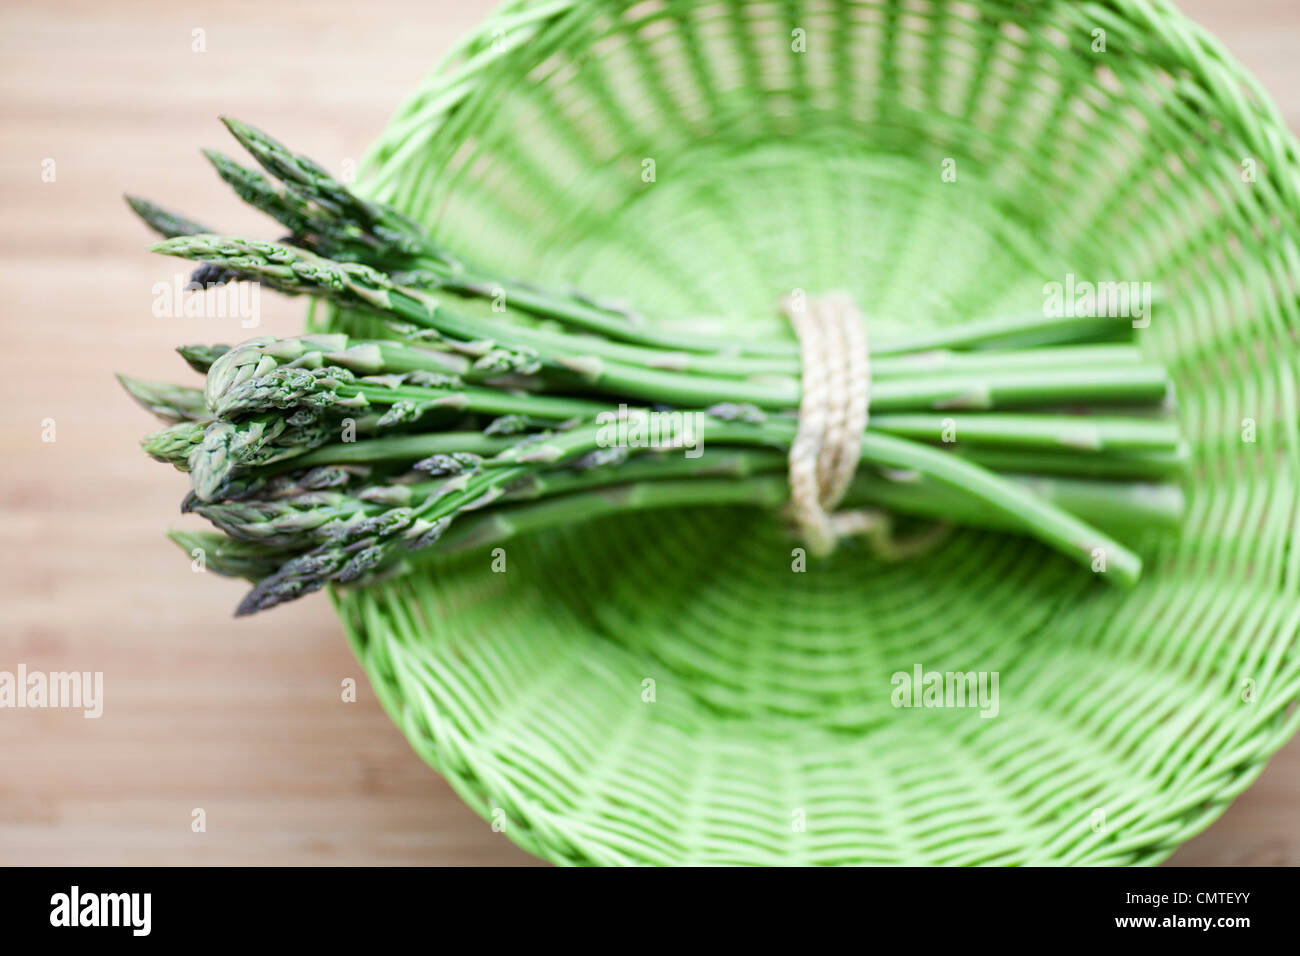 A basket with asparagus Stock Photo